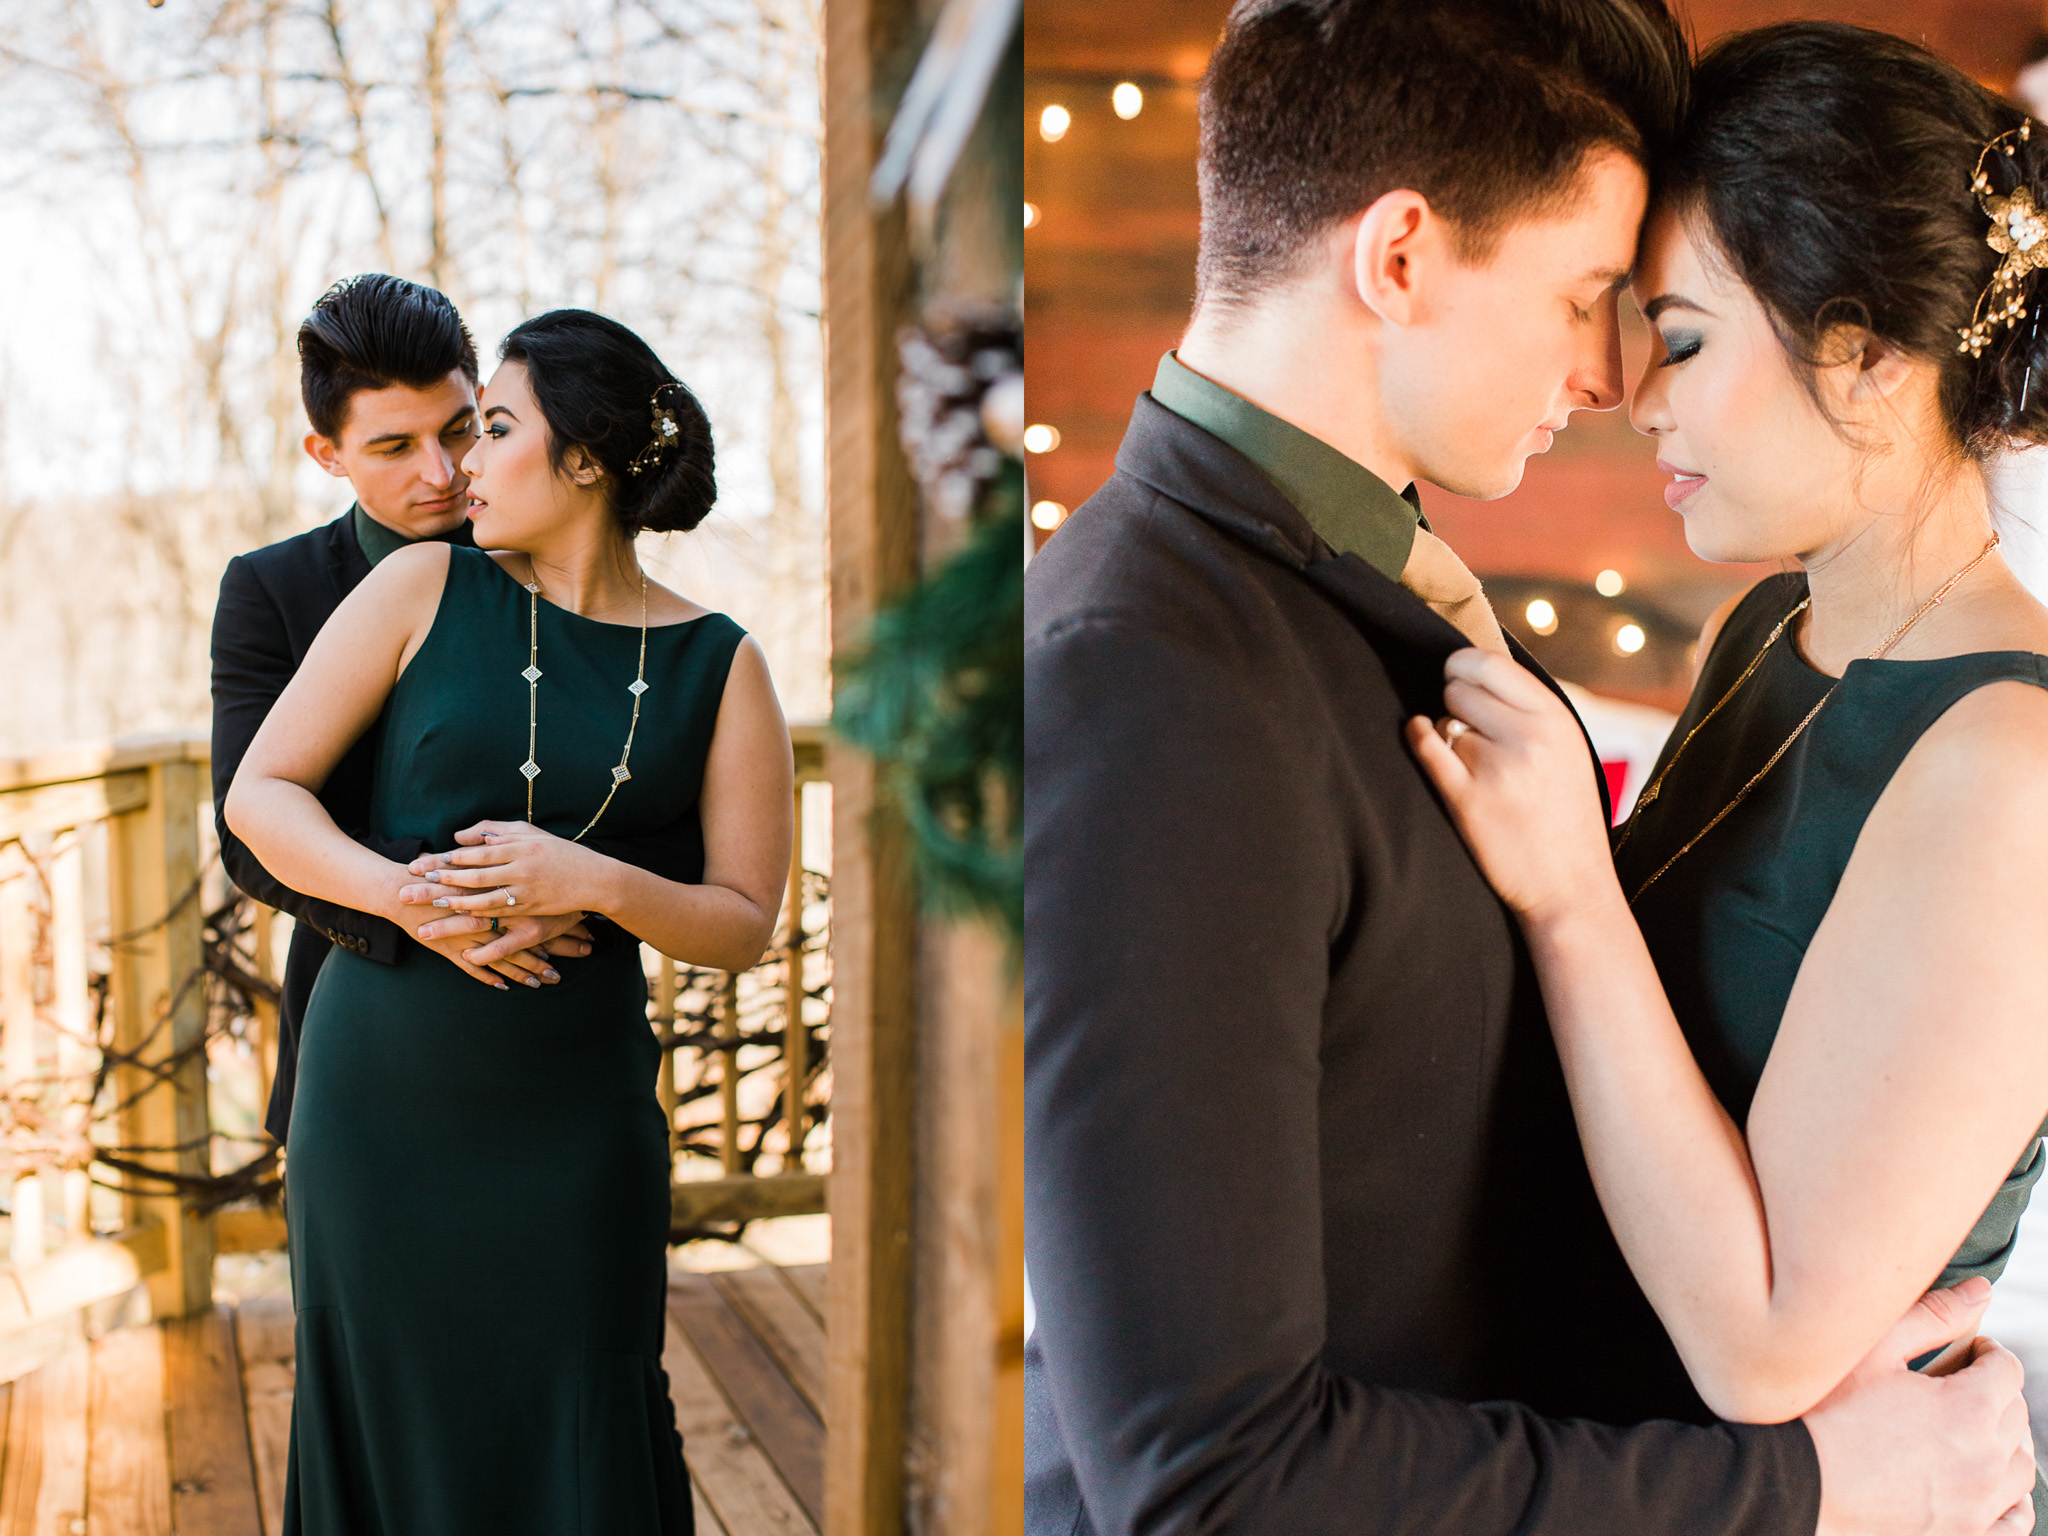 Elegant elopement at The Mohicans' Nest Treehouse